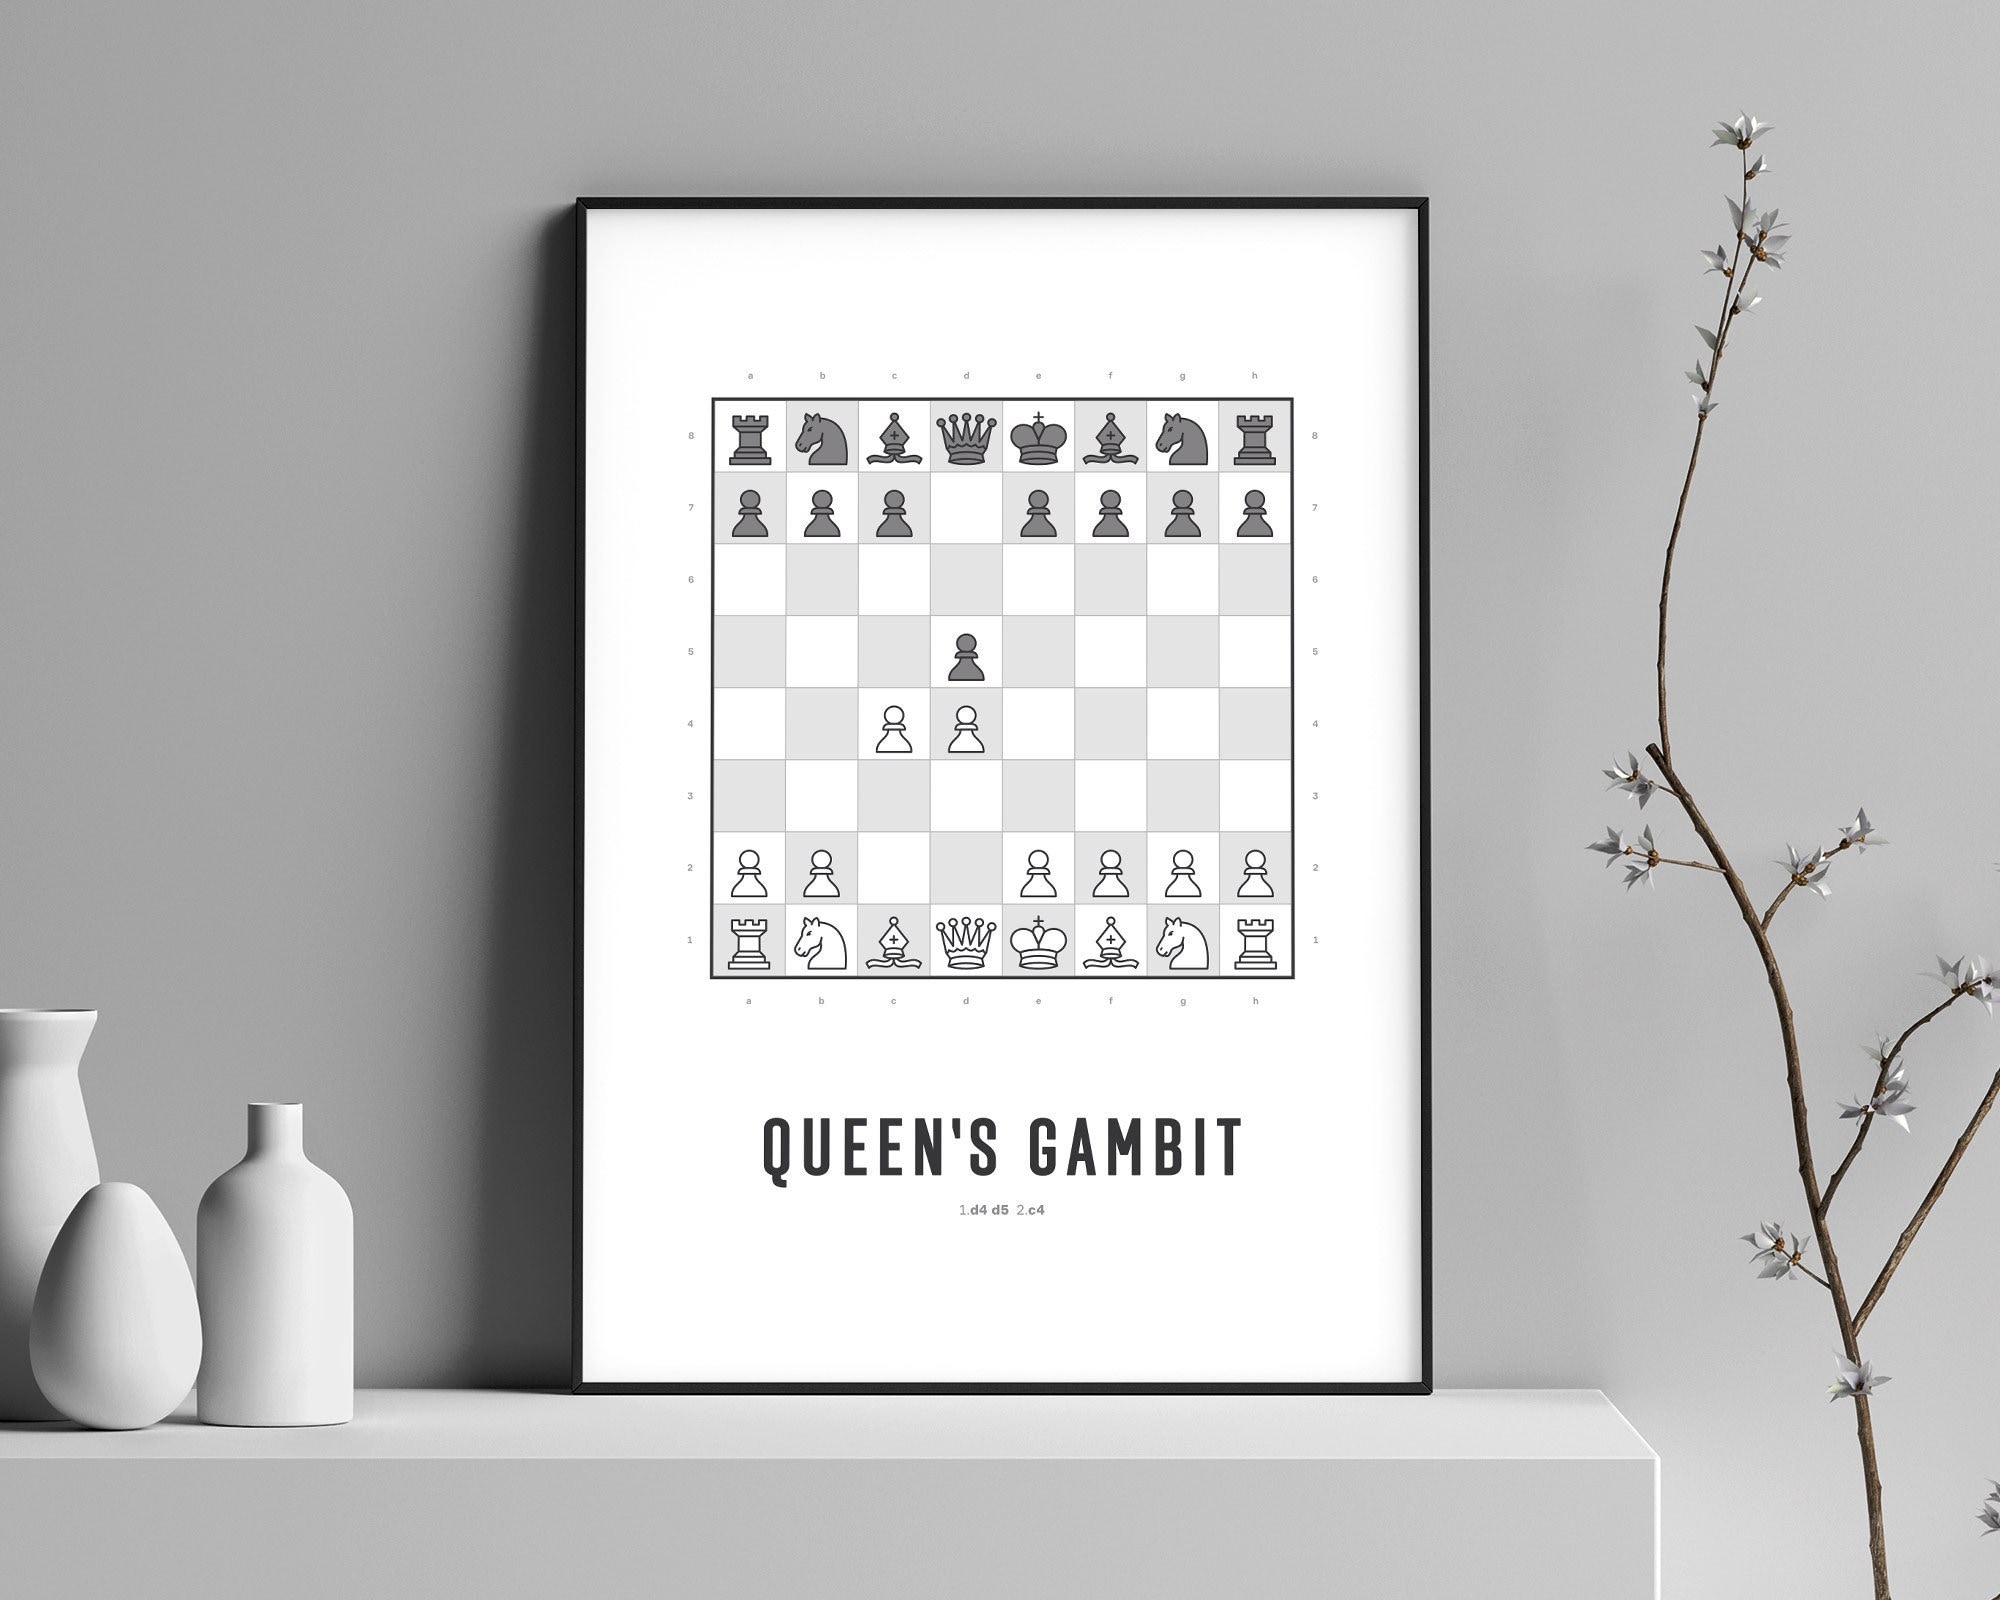 Queen's Gambit Opening - Remote Chess Academy